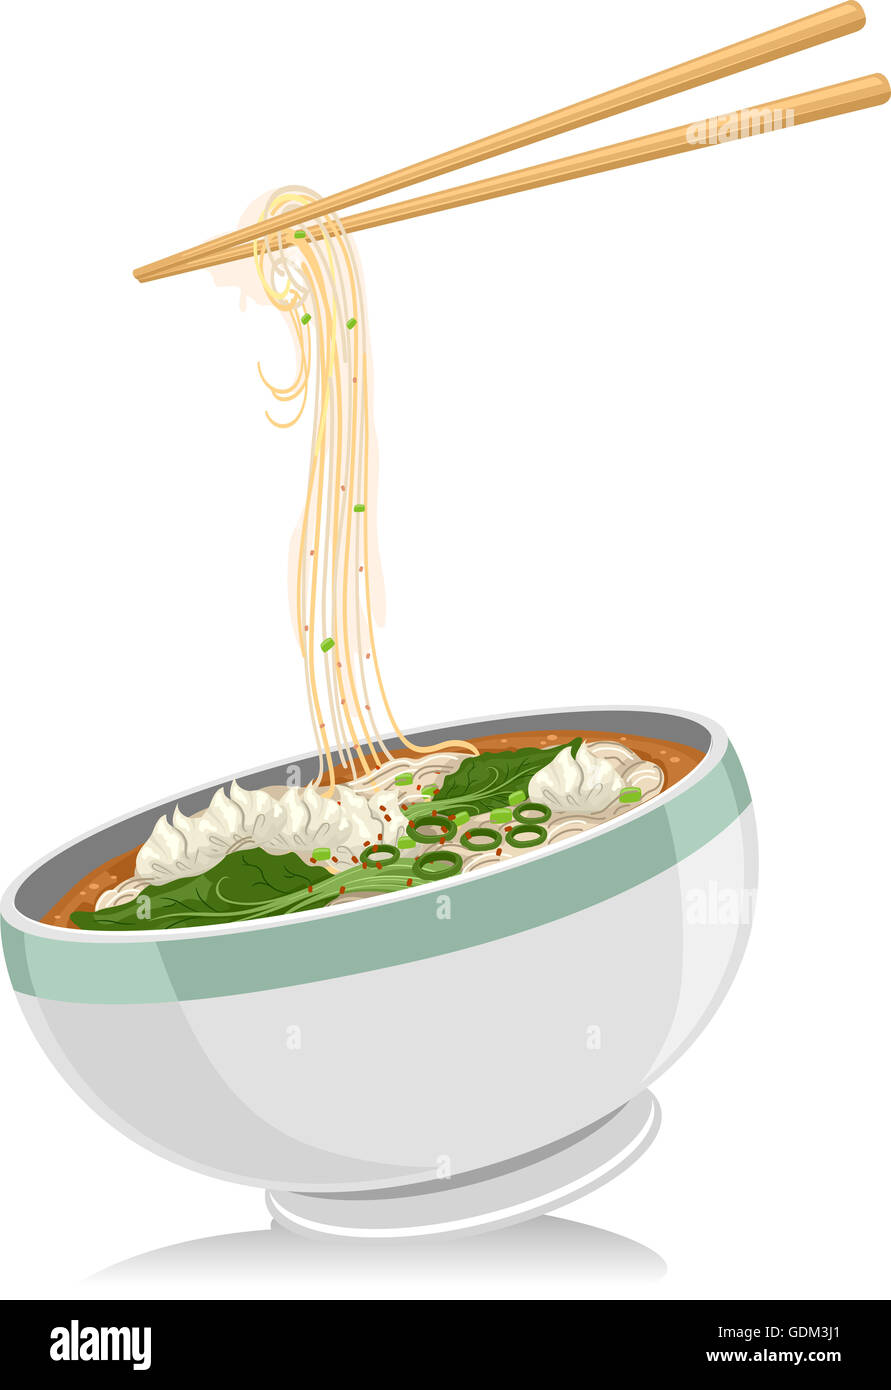 Illustration of a Bowl of Wonton Noodles With a Pair of Chopsticks Hovering Above Stock Photo